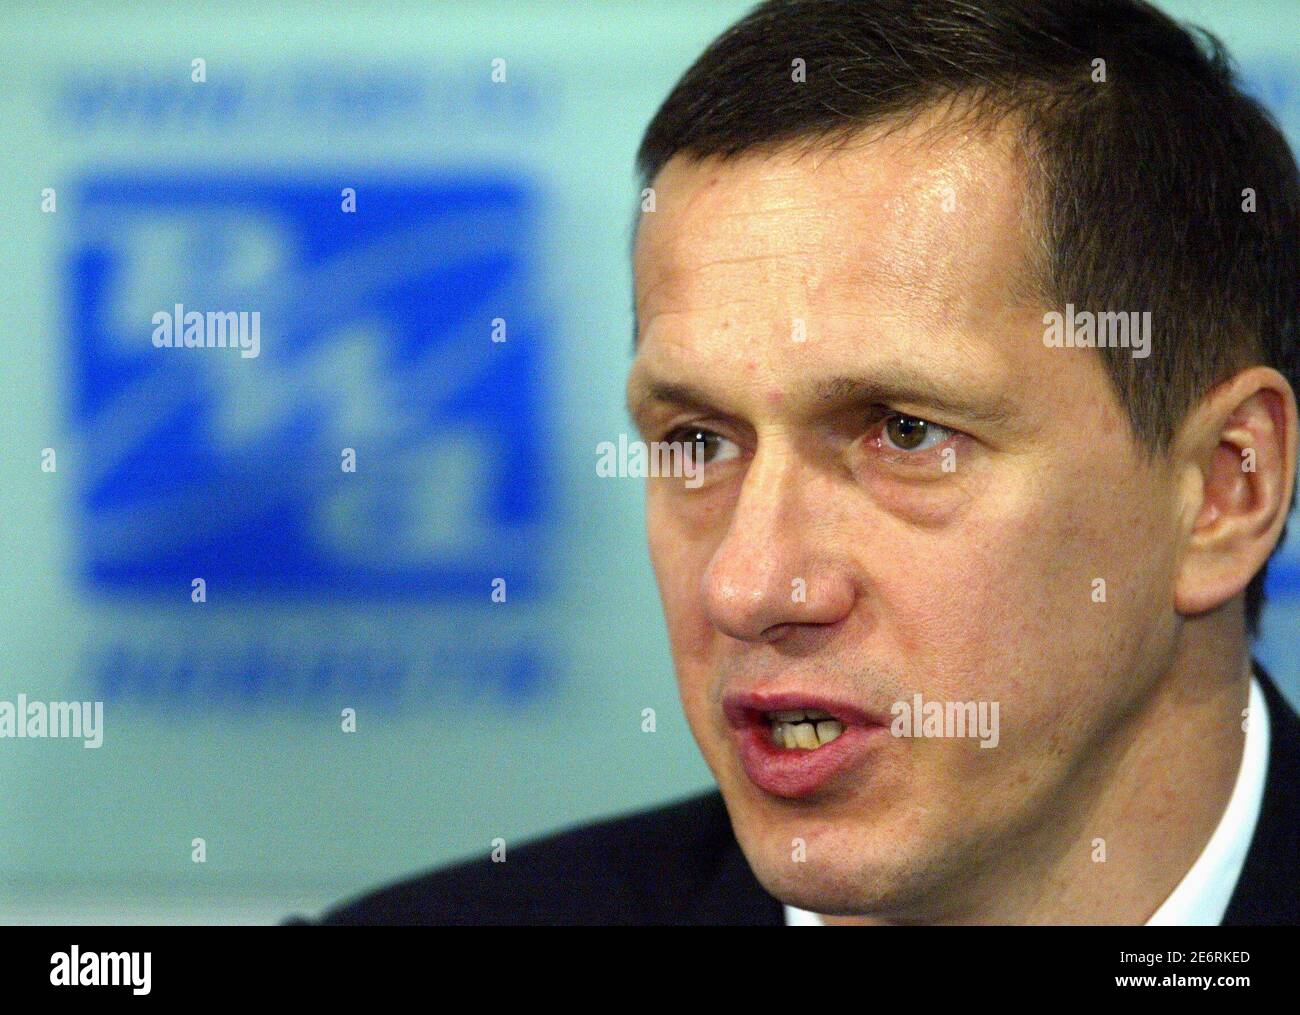 Russia's Natural Resources Minister Yuri Trutnev speaks during his news conference in Moscow on the results of his trip to Sakhalin in the country's far east, October 27, 2006. Trutnev said on Friday that British-Russian oil firm TNK-BP, which is half-owned by BP Plc, had the worst record of exploiting oil wells in Russia.   REUTERS/Anton Denisov (RUSSIA) Stock Photo